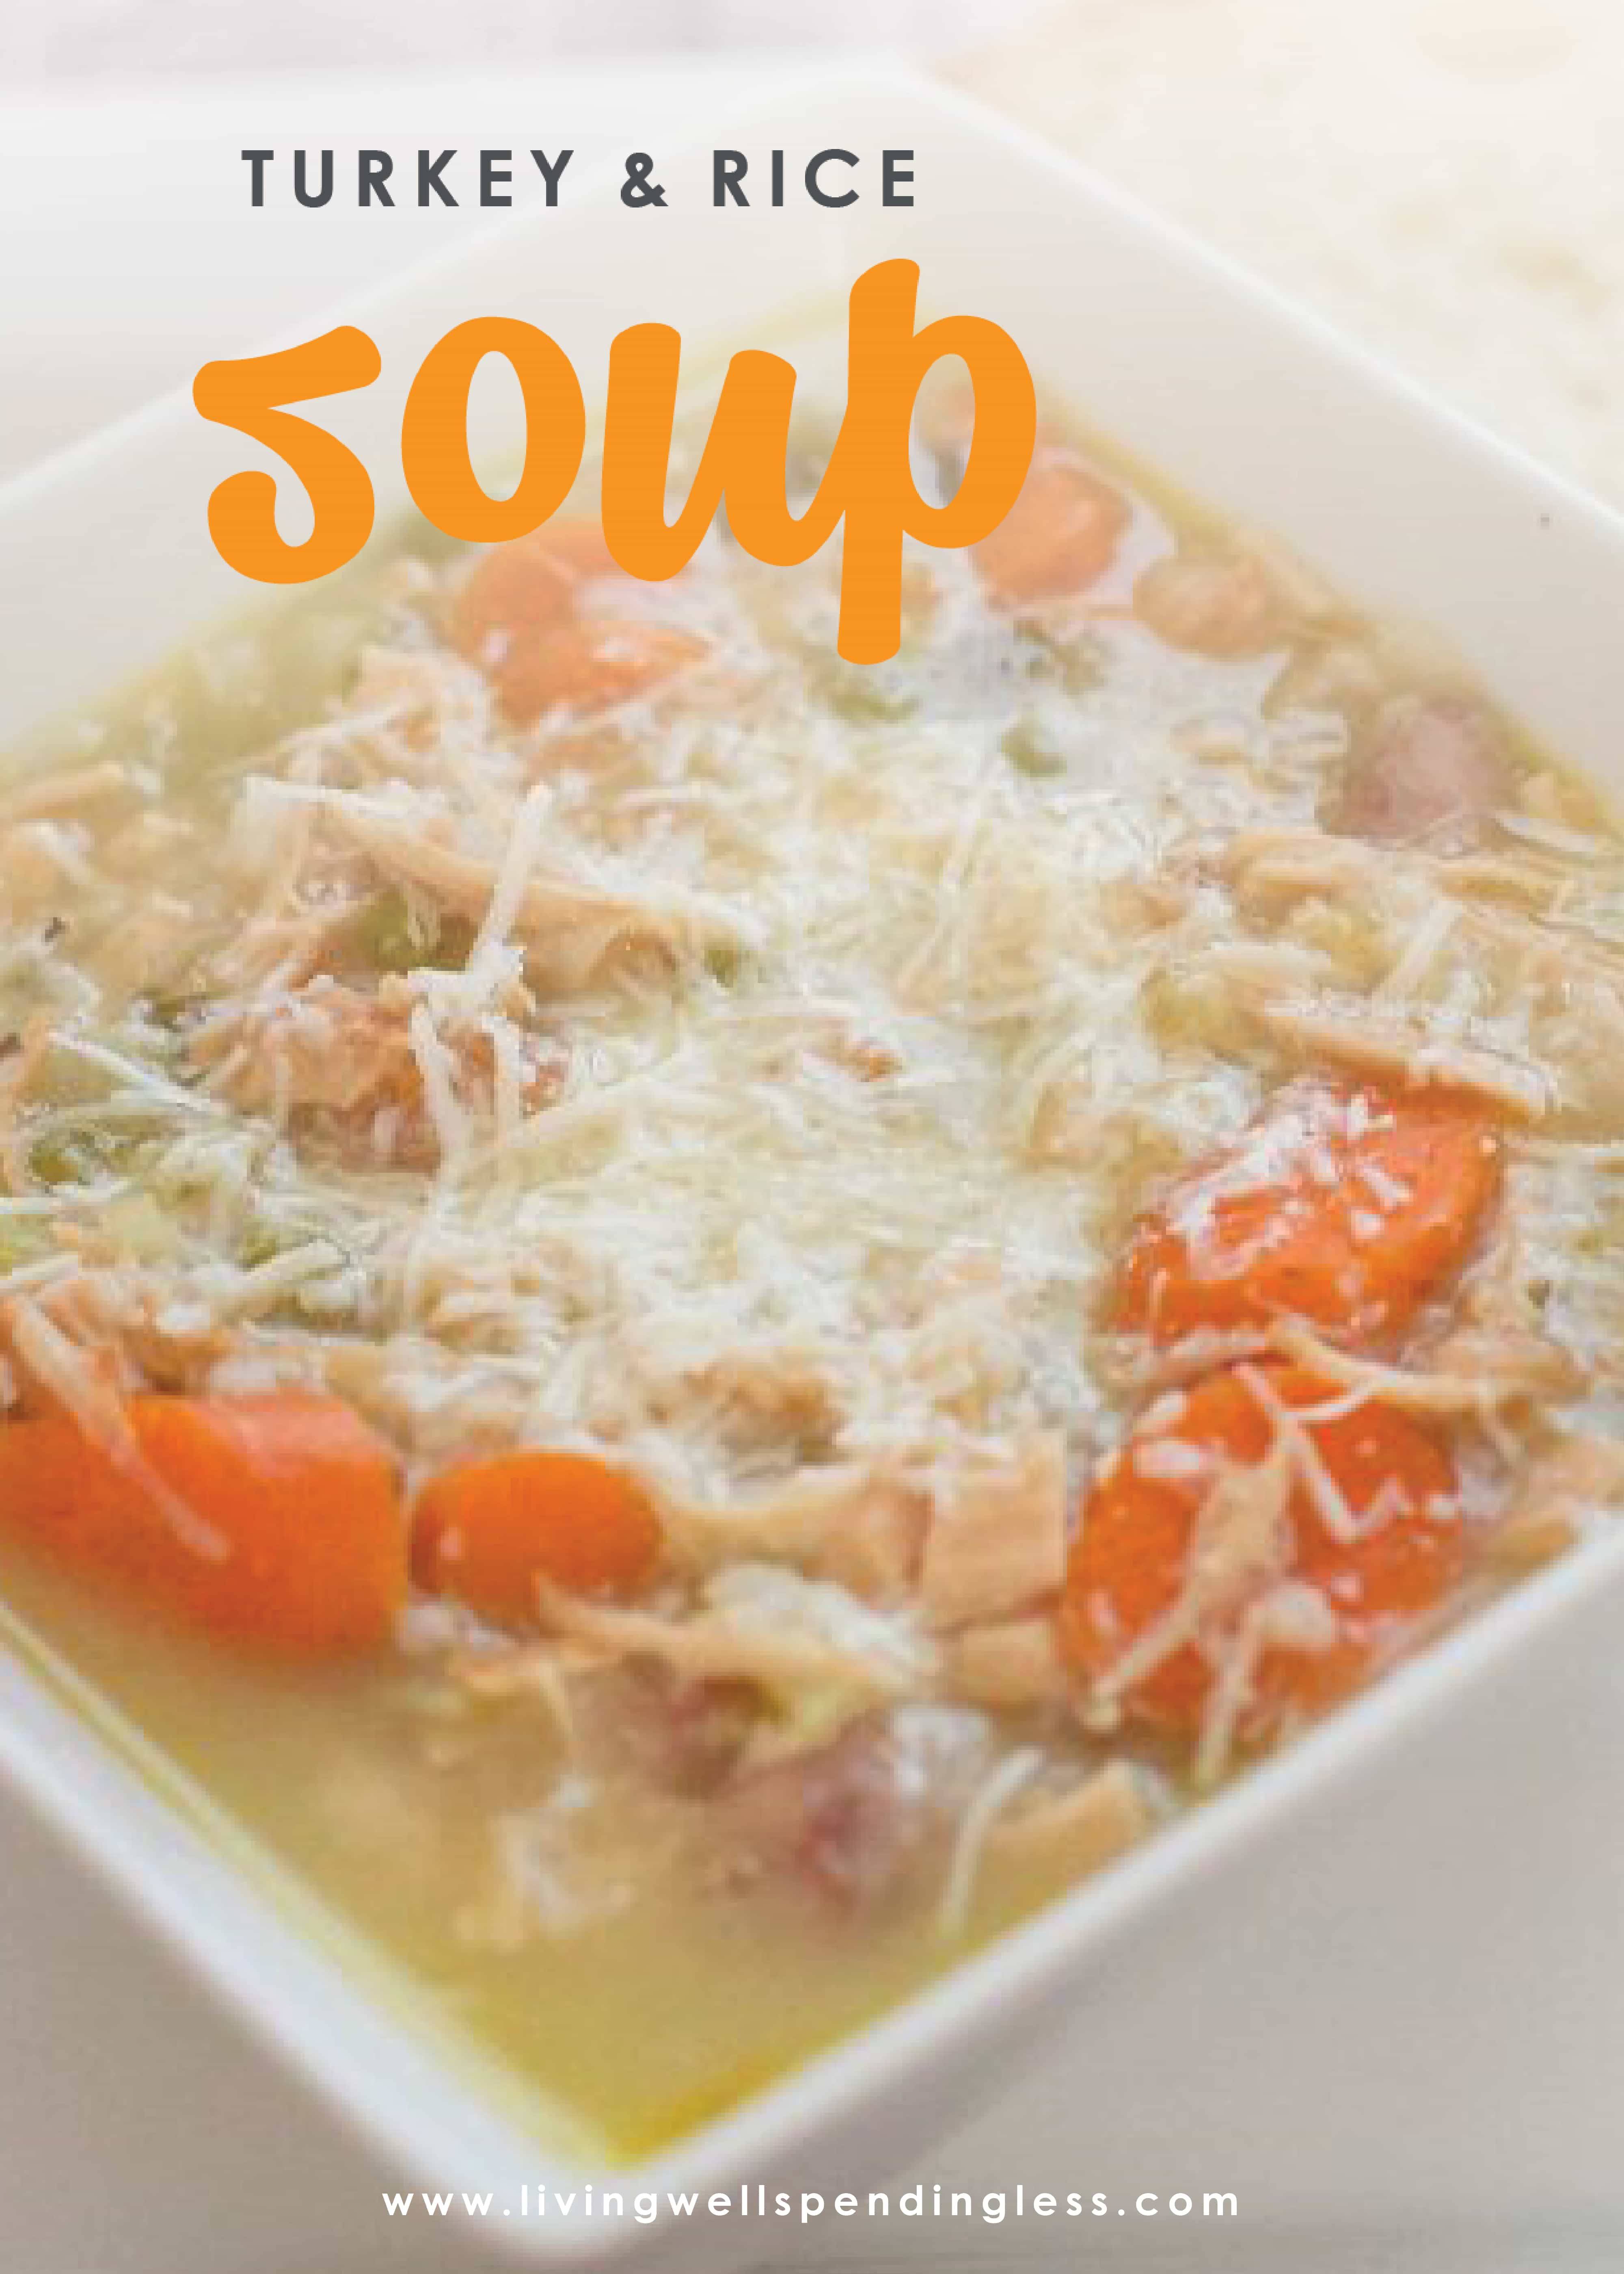 This deliciously simple Turkey & Rice Soup is the perfect way to use up all those holiday leftovers, and with just a few super simple ingredients, comes together in minutes (and is freezer friendly too!)